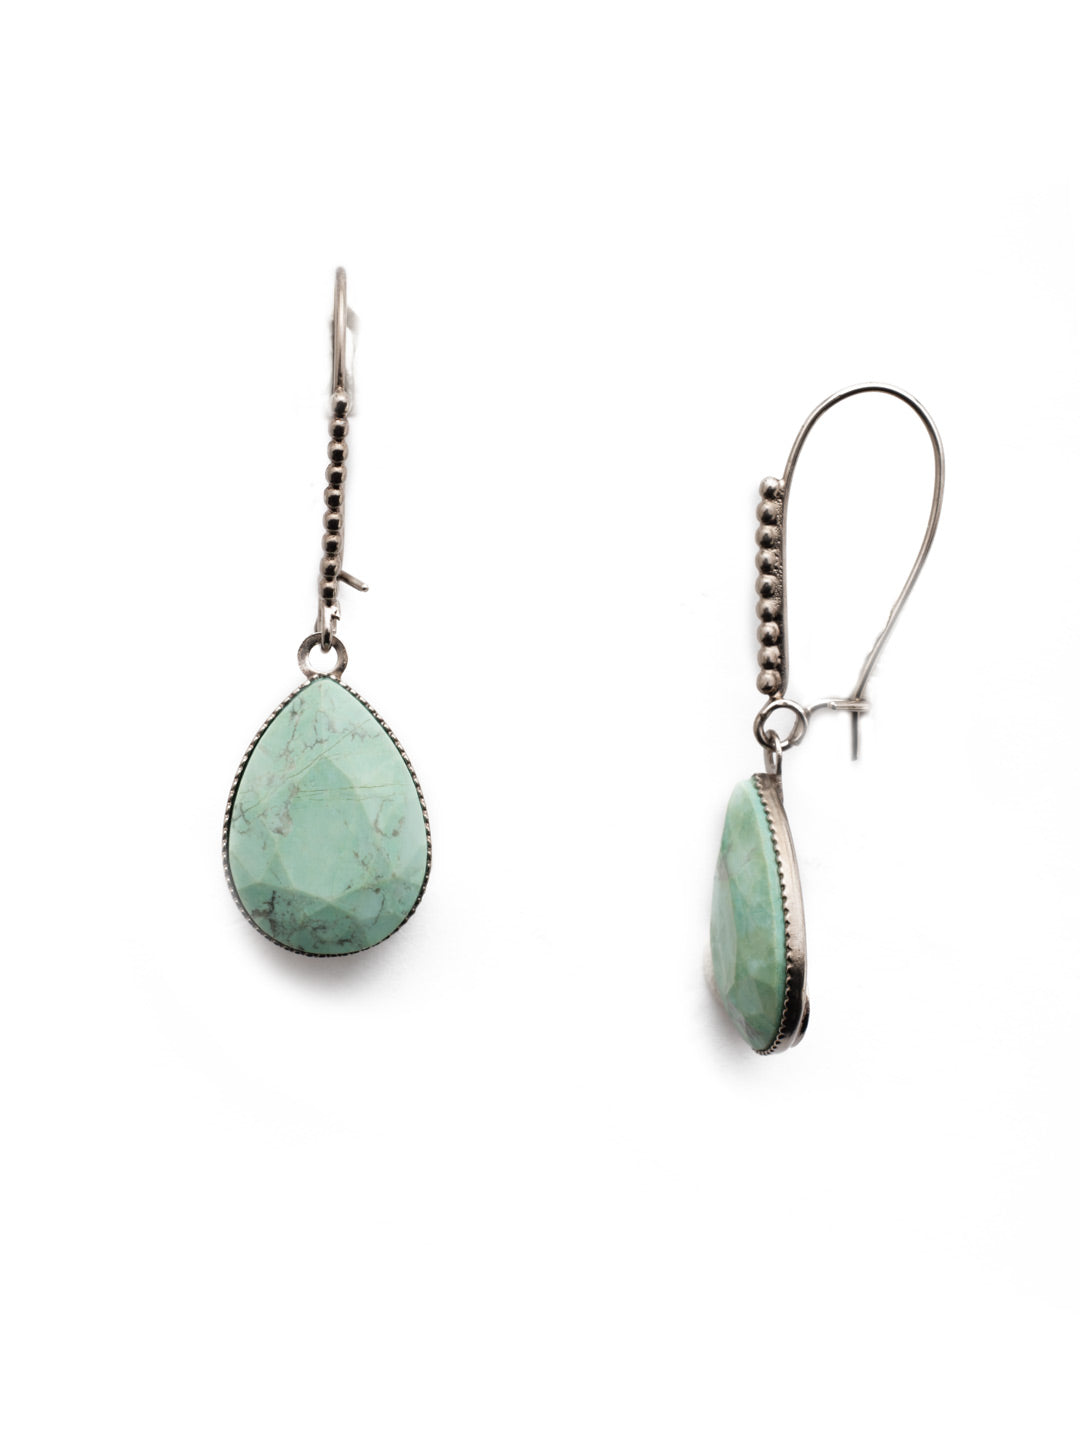 Arizona Dangle Earrings - EEU13ASNFT - If you love an earthy feel to your jewelry, grab our Arizona Dangle Earrings featuring rich, pear-shaped mineral stones. From Sorrelli's Night Frost collection in our Antique Silver-tone finish.